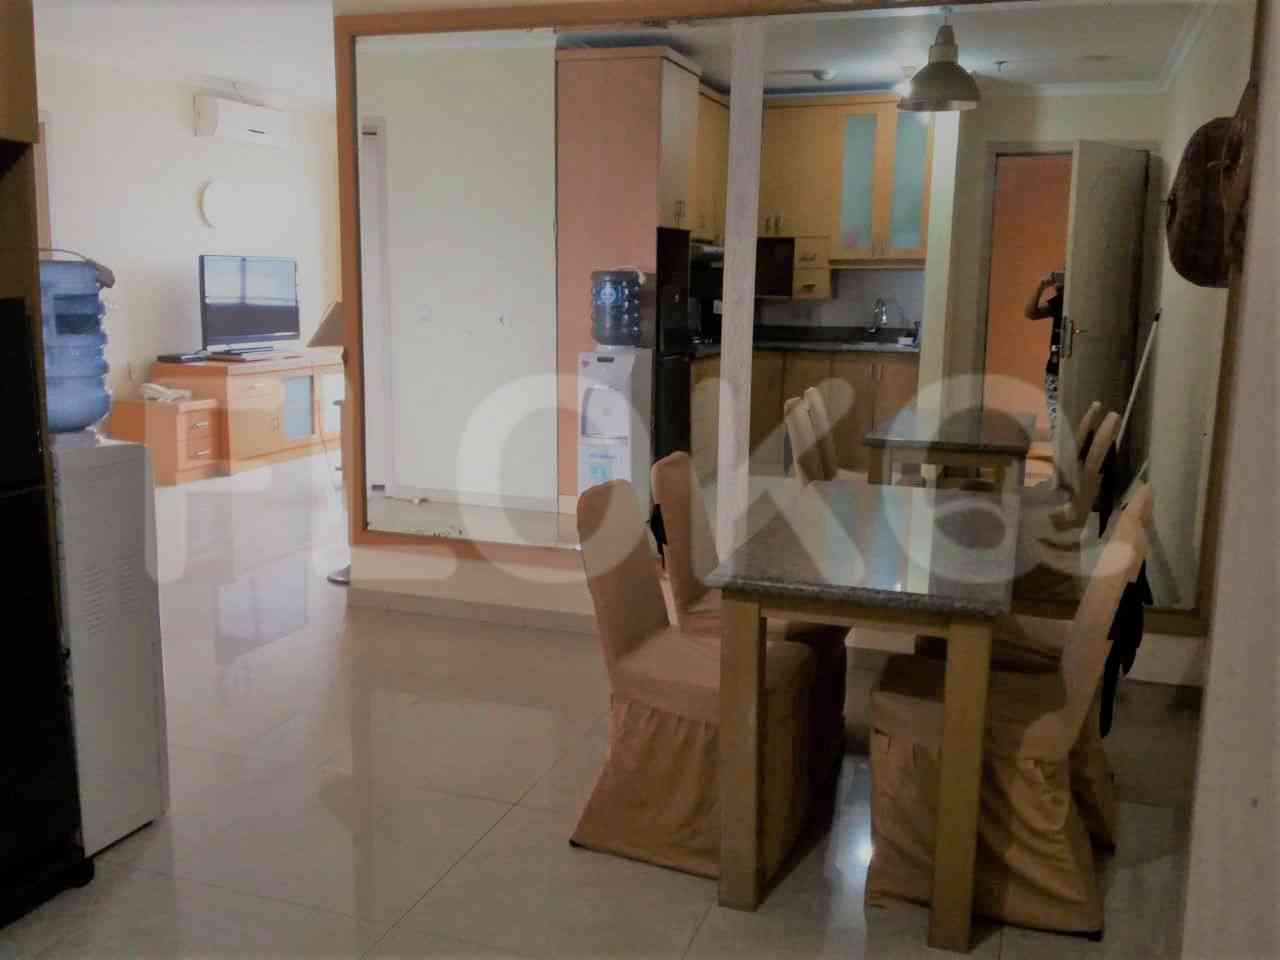 2 Bedroom on 18th Floor for Rent in Permata Senayan Apartment - fpafc3 4